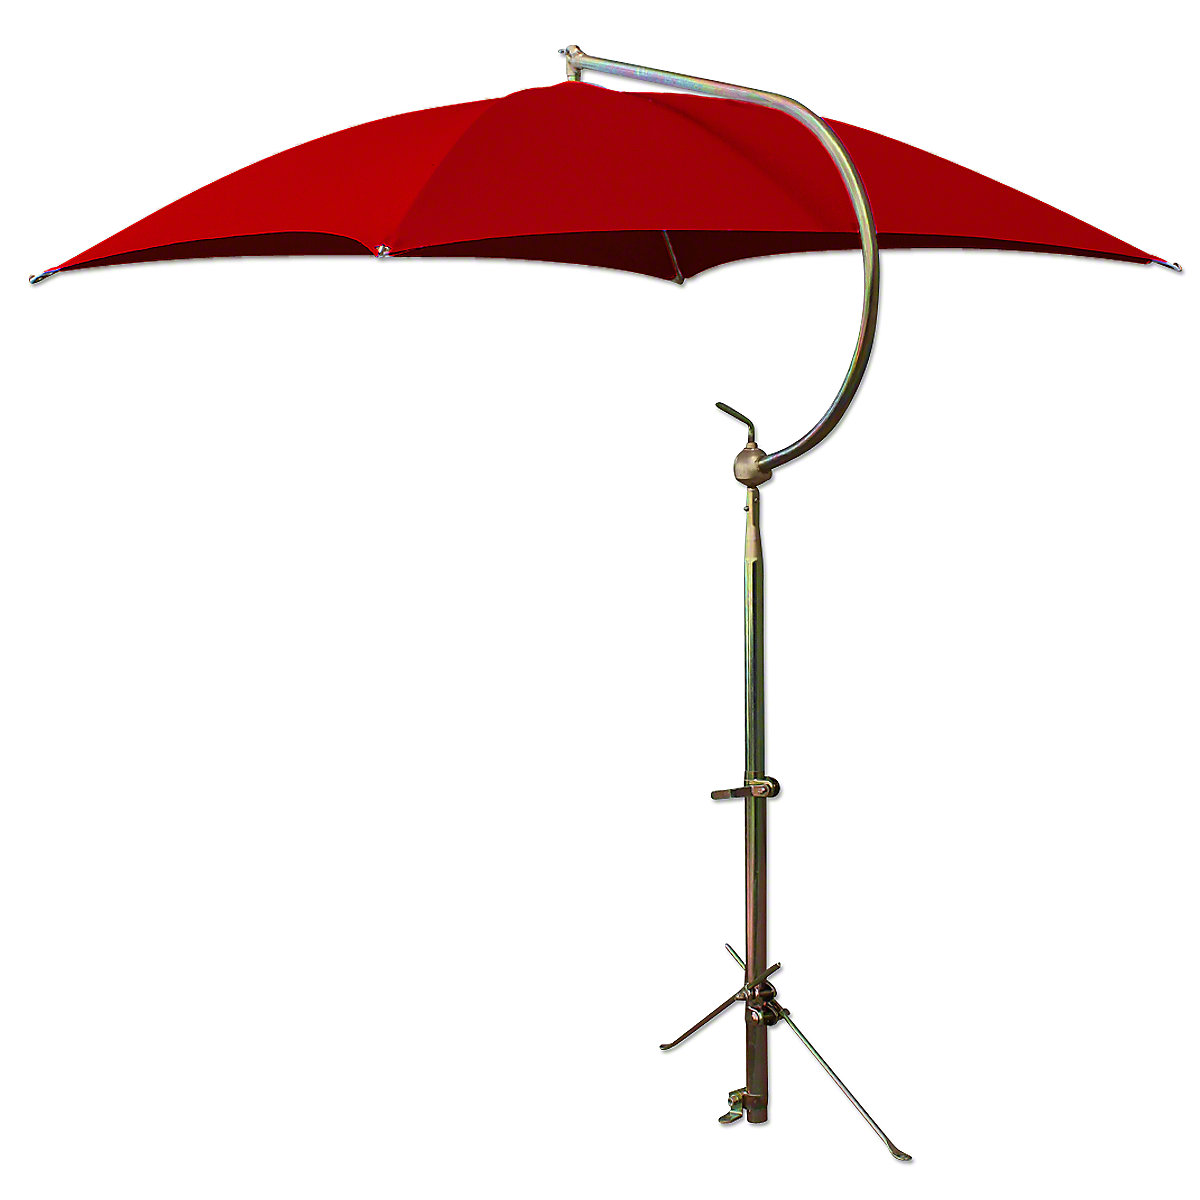 Deluxe Red Umbrella With Brackets For Massey Harris And Massey Ferguson Tractors.